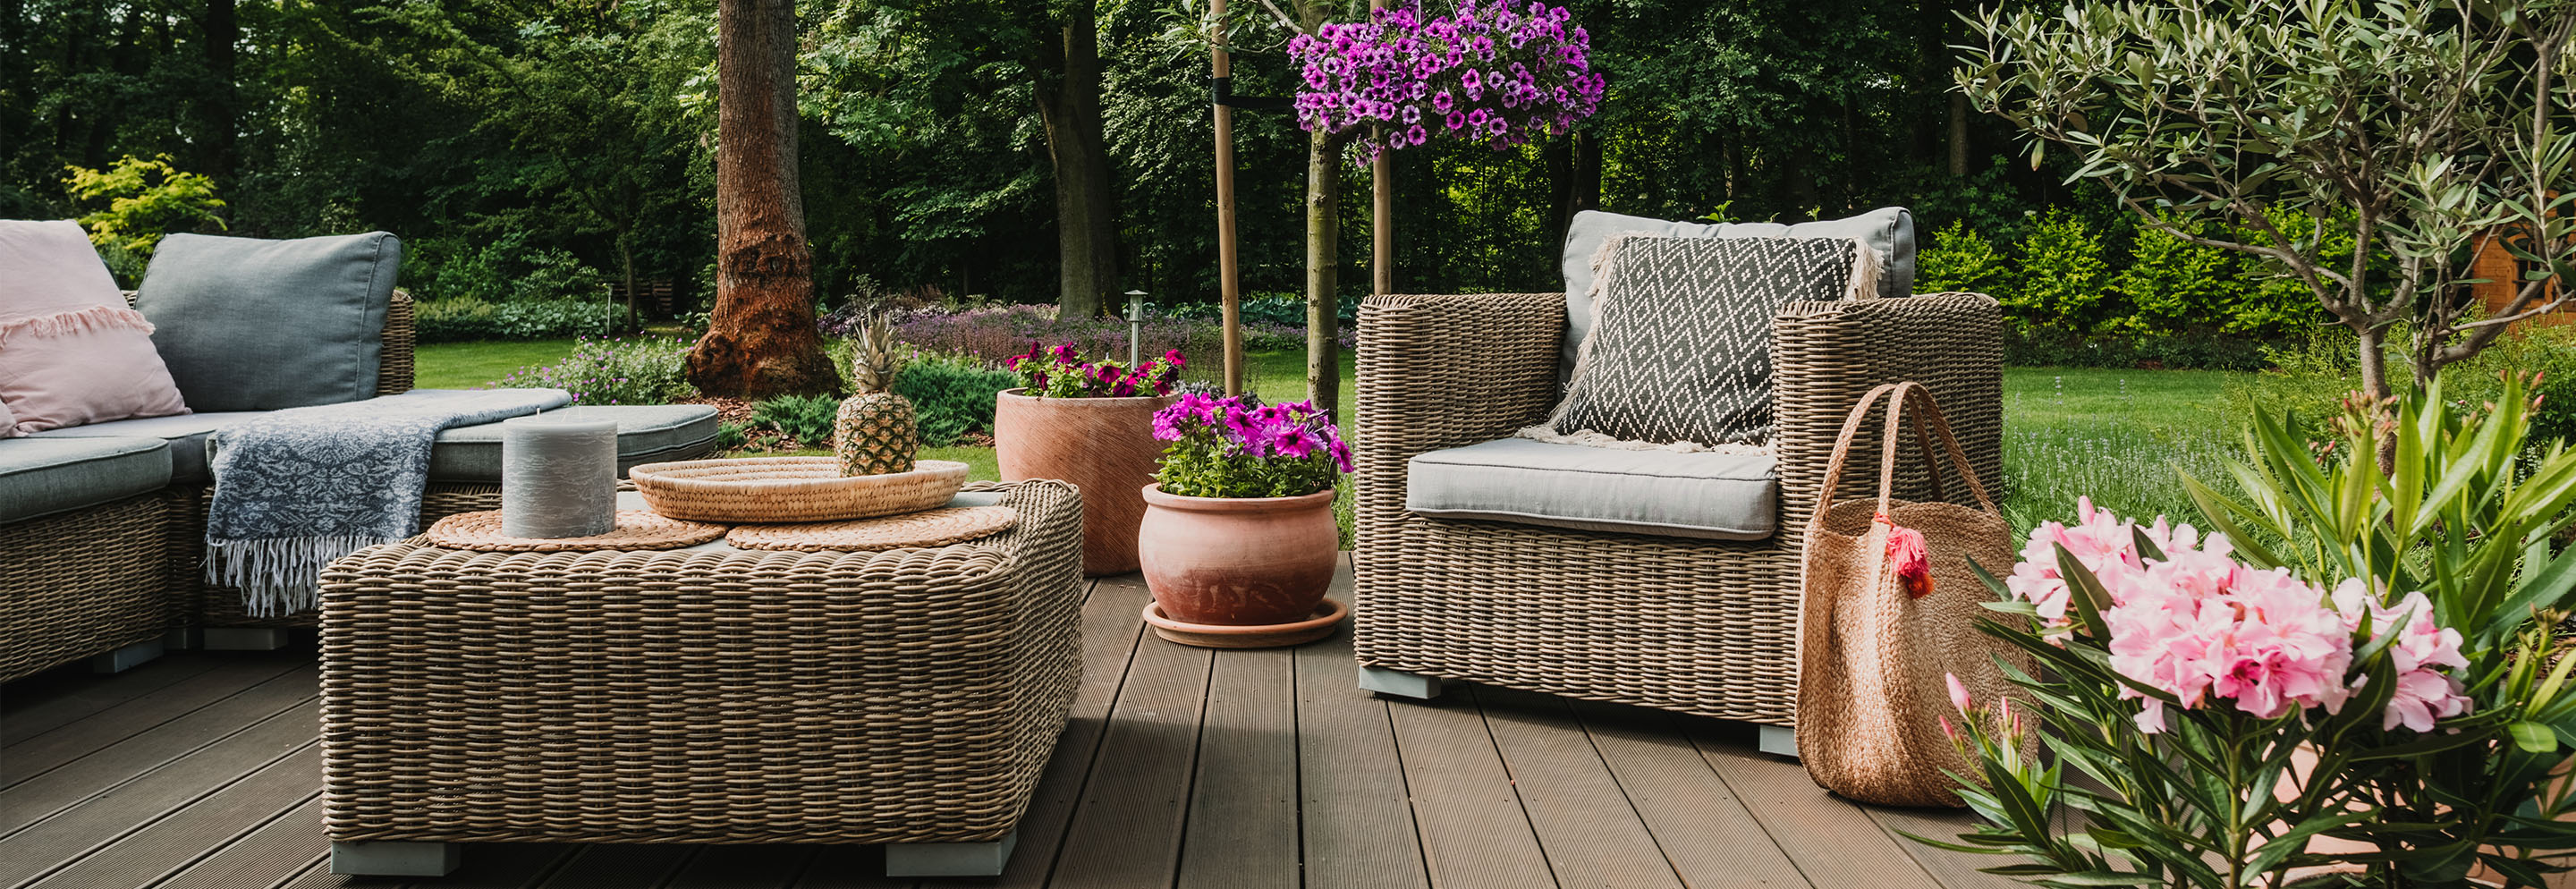 Spruce Up Your Home and Garden with Intermatic Solutions